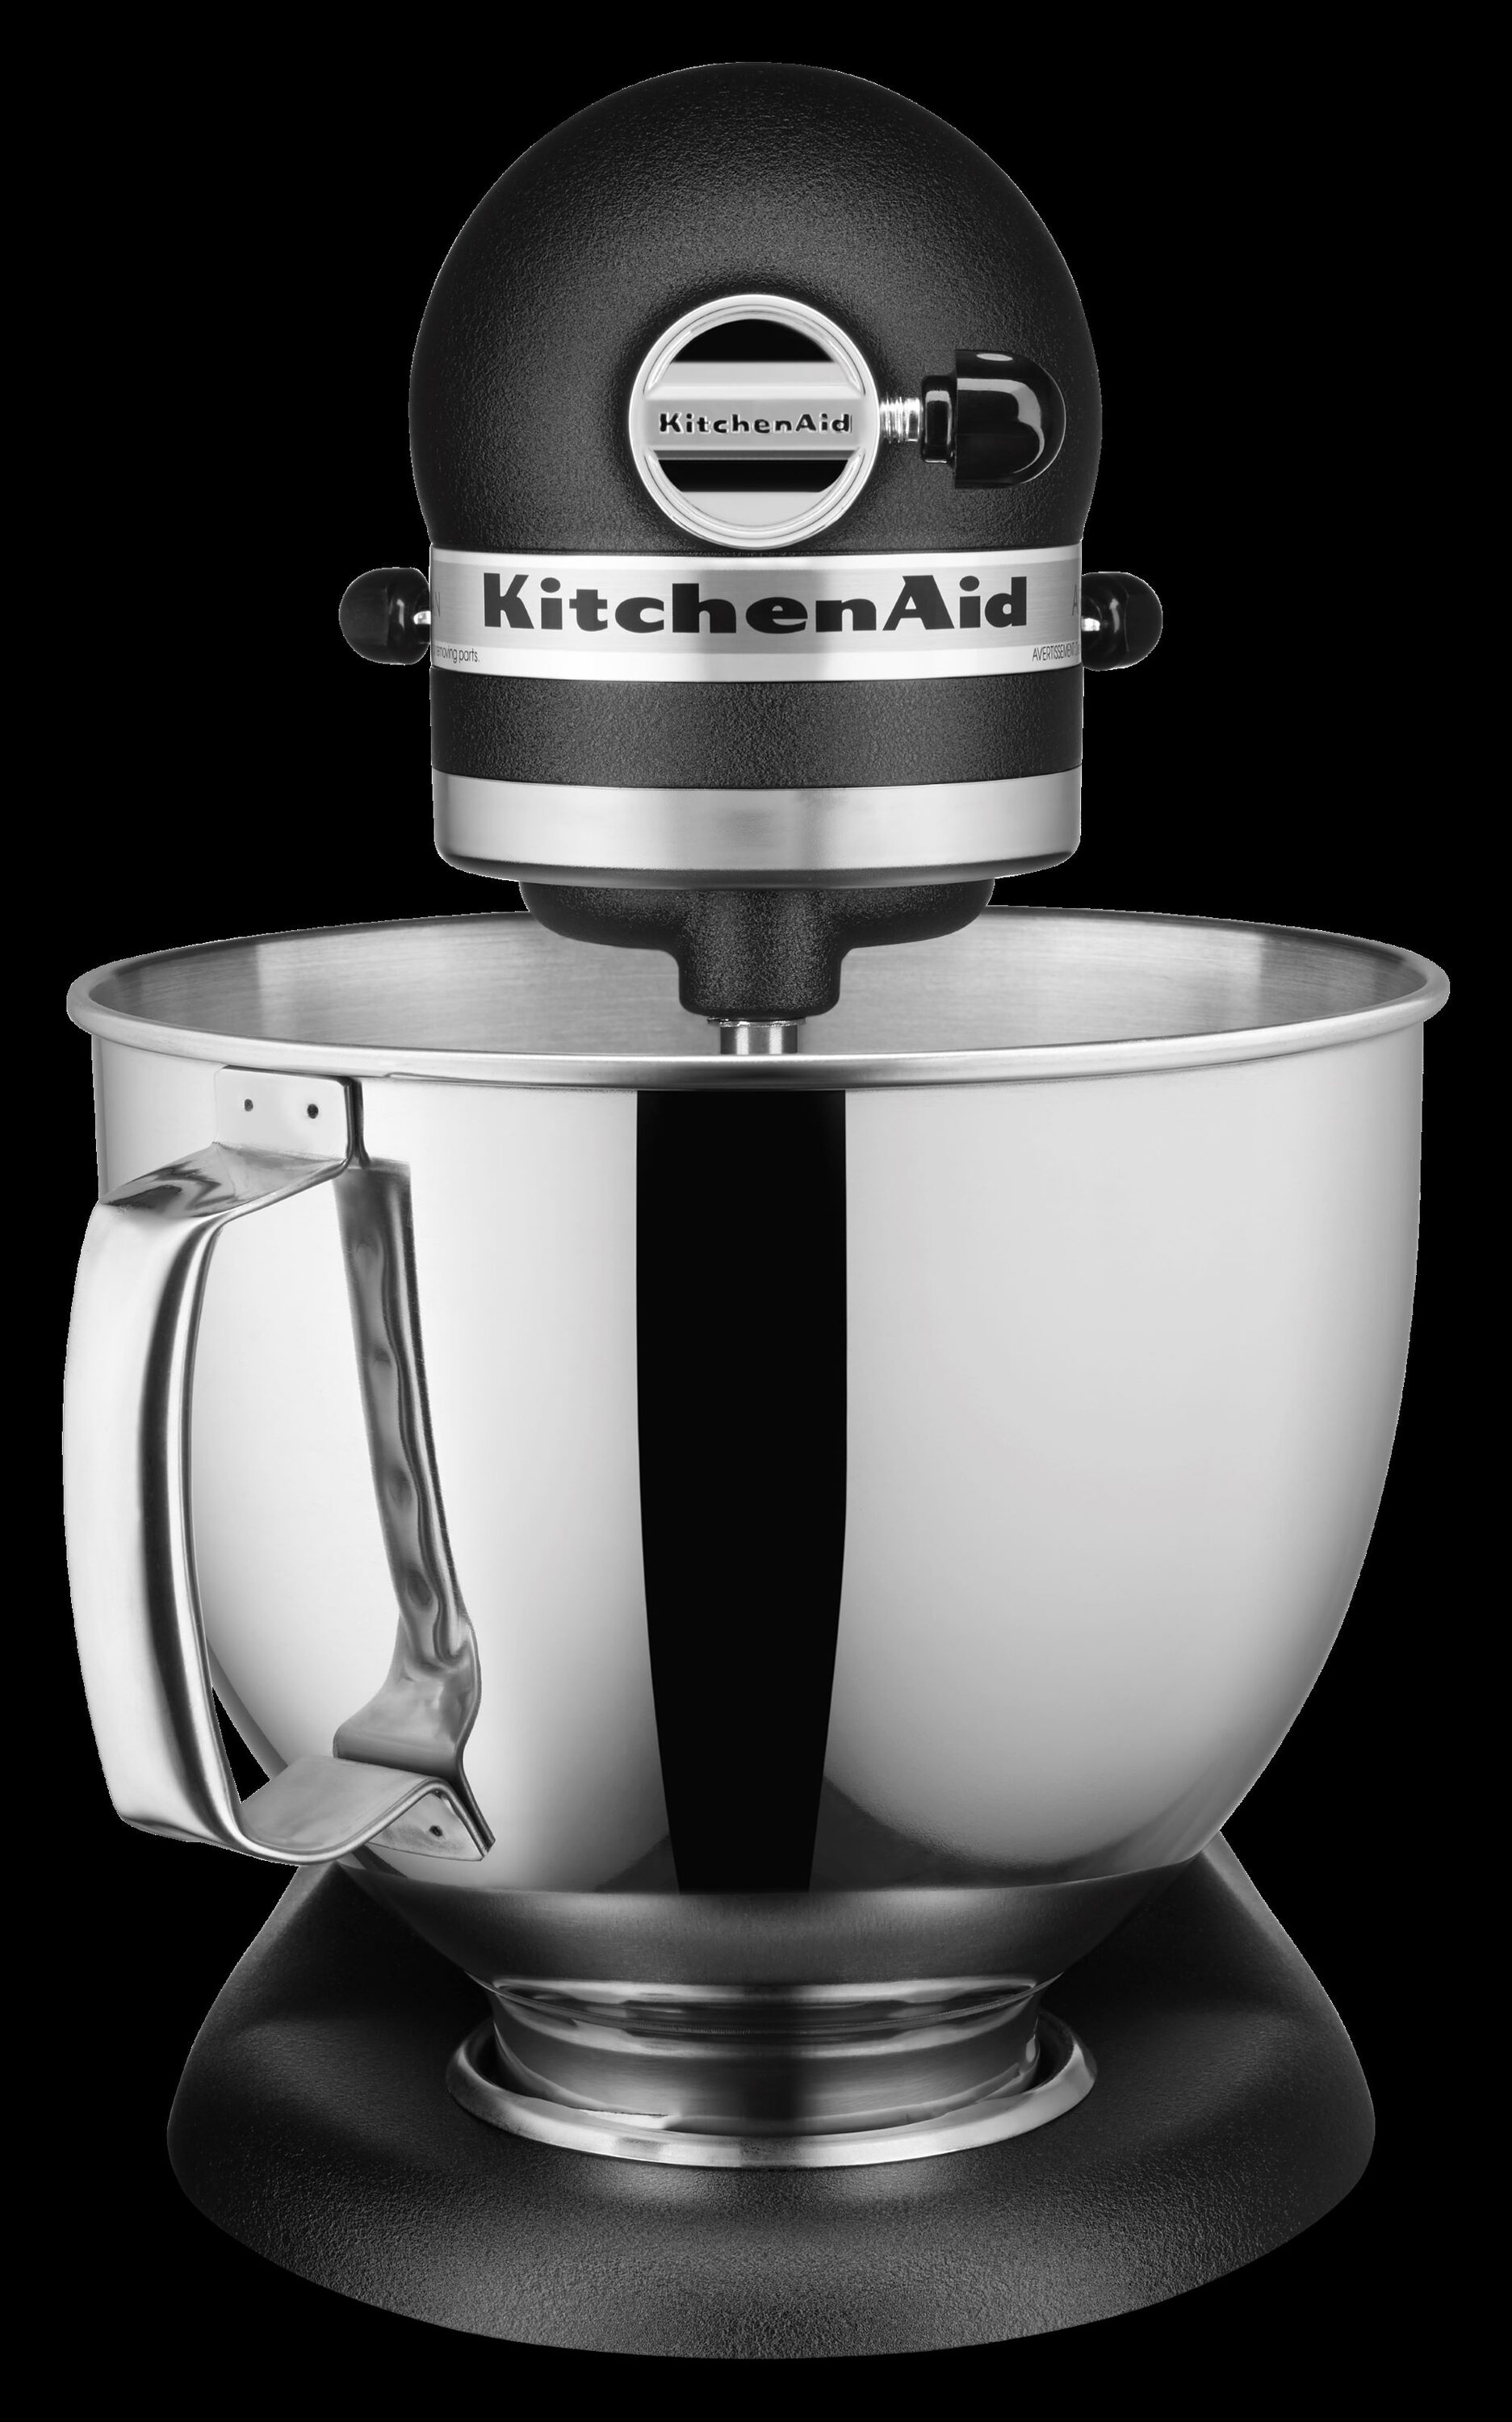 Stand in Series the Imperial Mixers Mixer at KitchenAid department 10-Speed Black Artisan Stand 5-Quart Residential